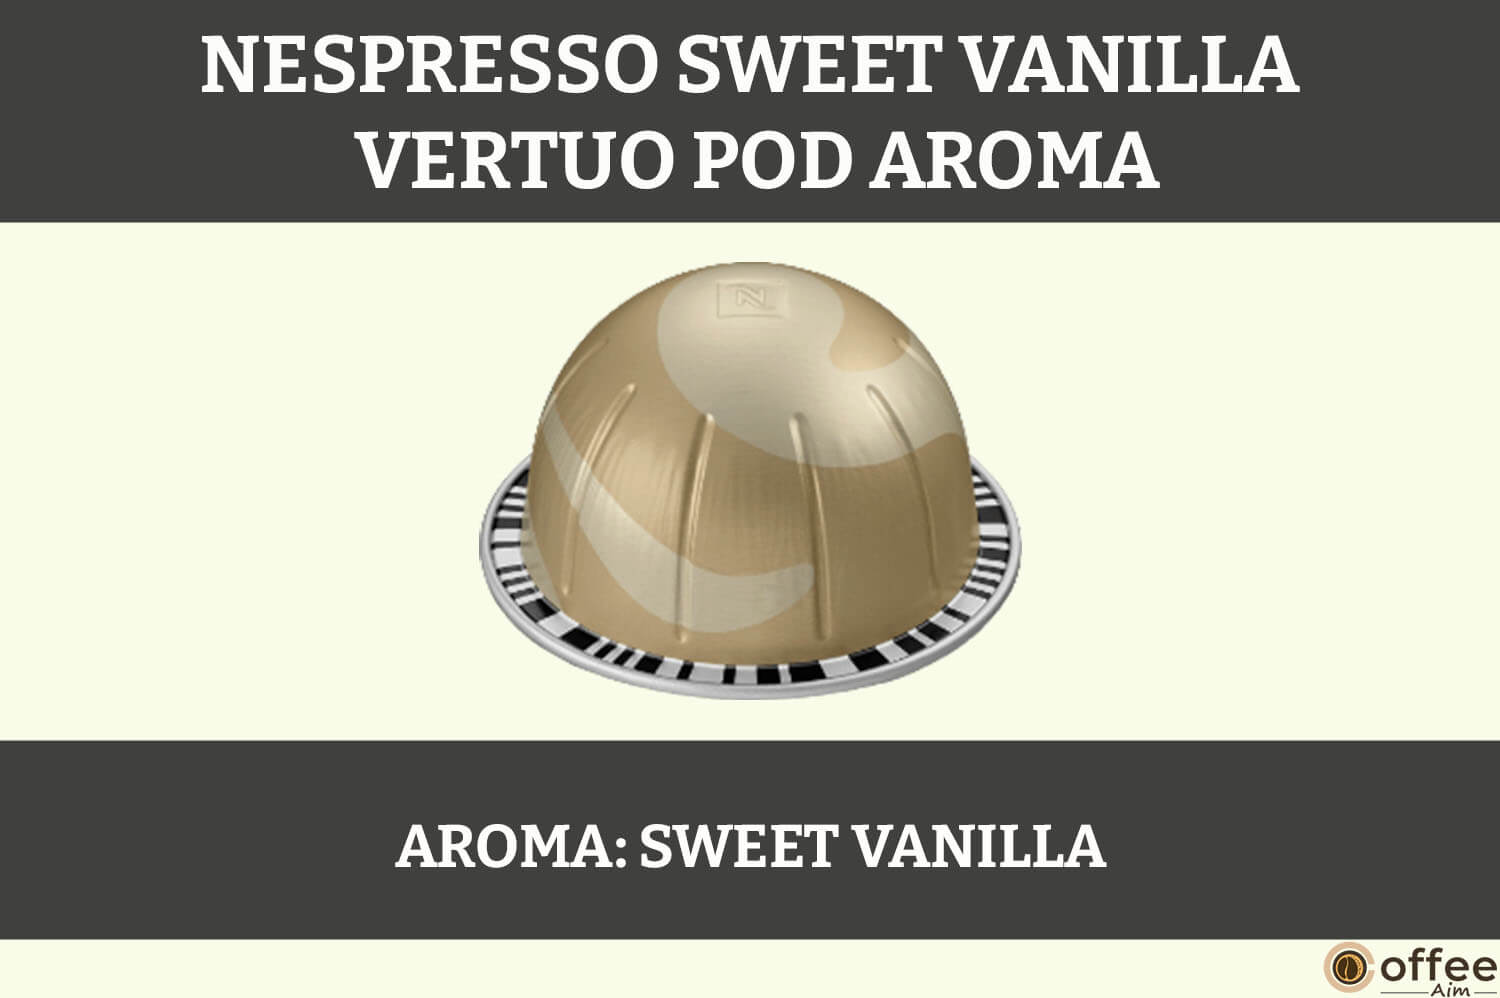 This image captures the essence of the Nespresso Sweet Vanilla Vertuo Pod, as featured in the article 'Nespresso Sweet Vanilla Vertuo Pod Review'